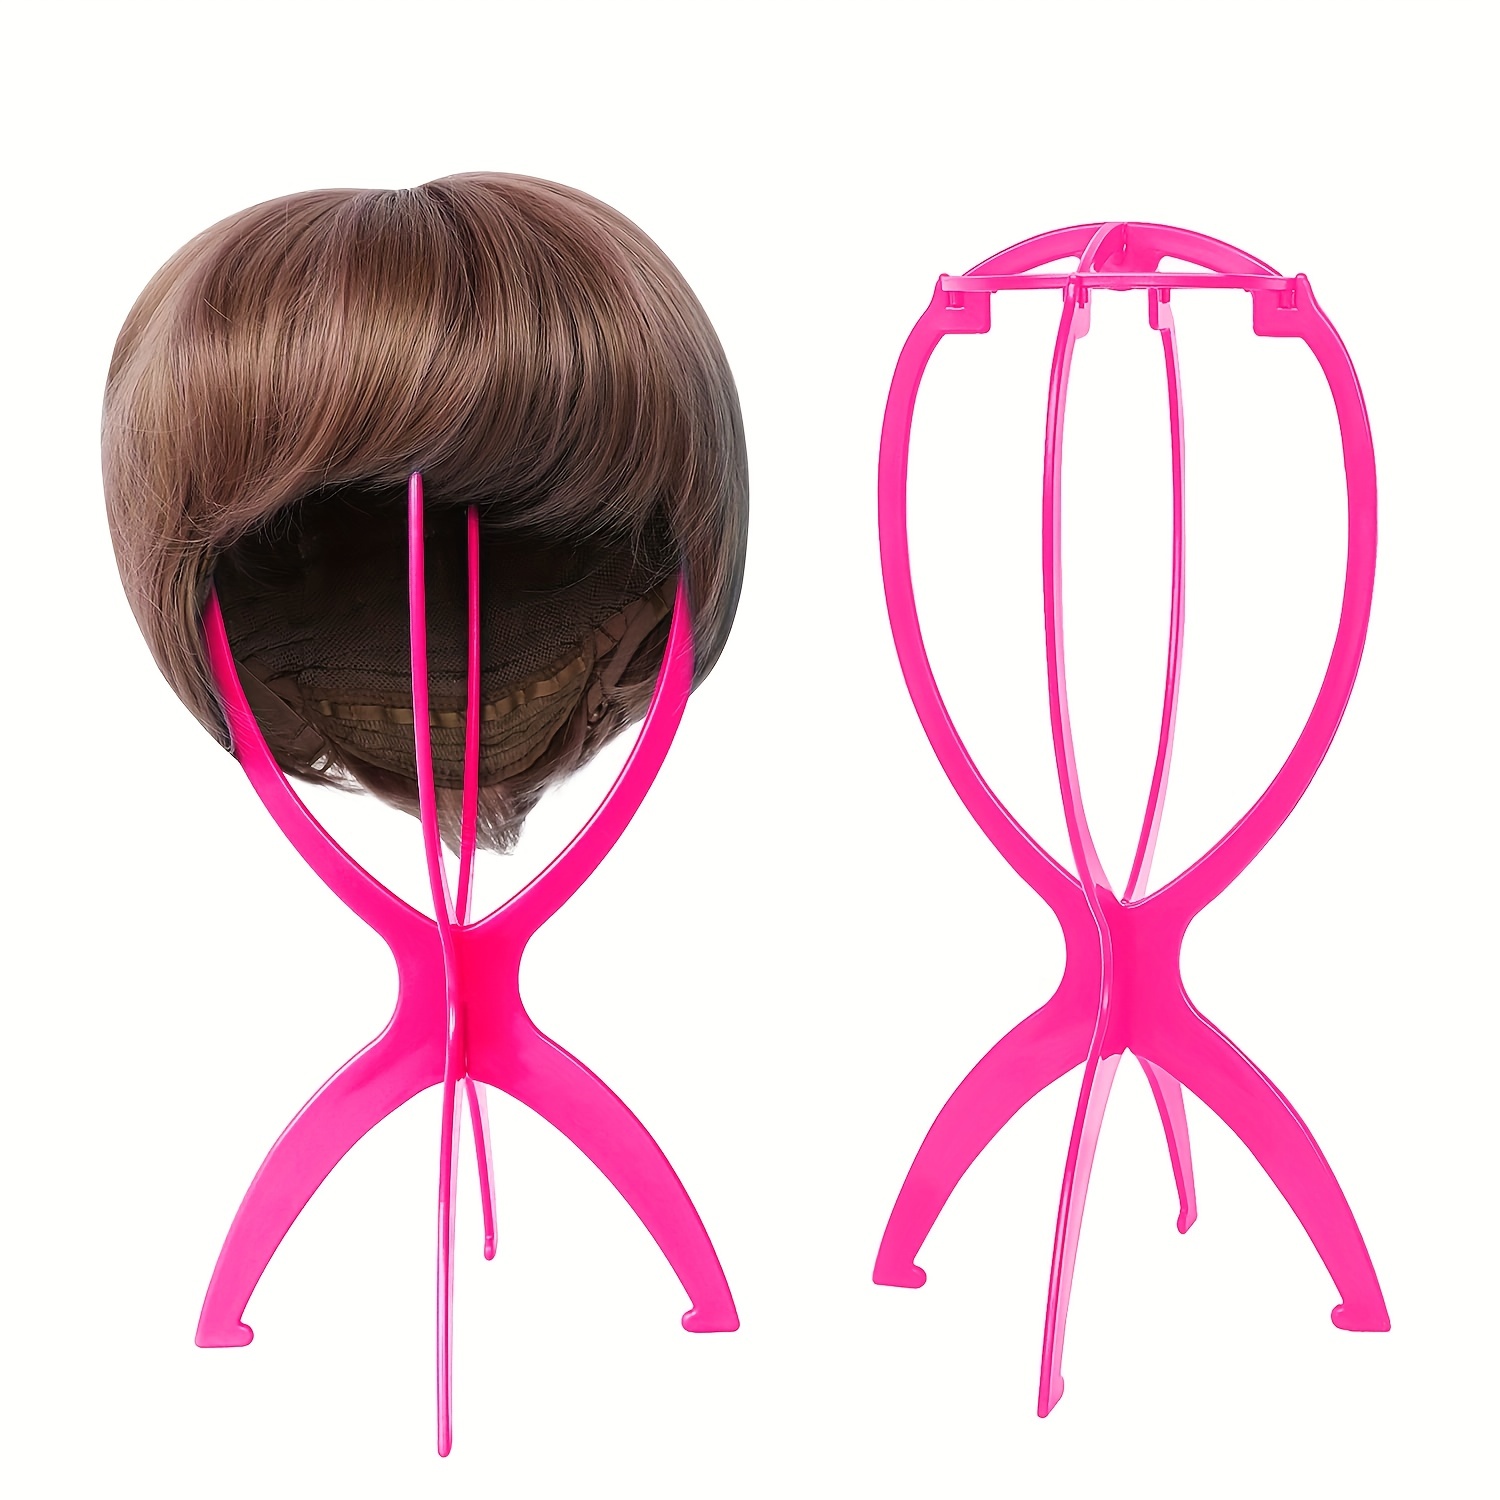  Wig Stand Pink 1PC Adjustable Height Portable Wig